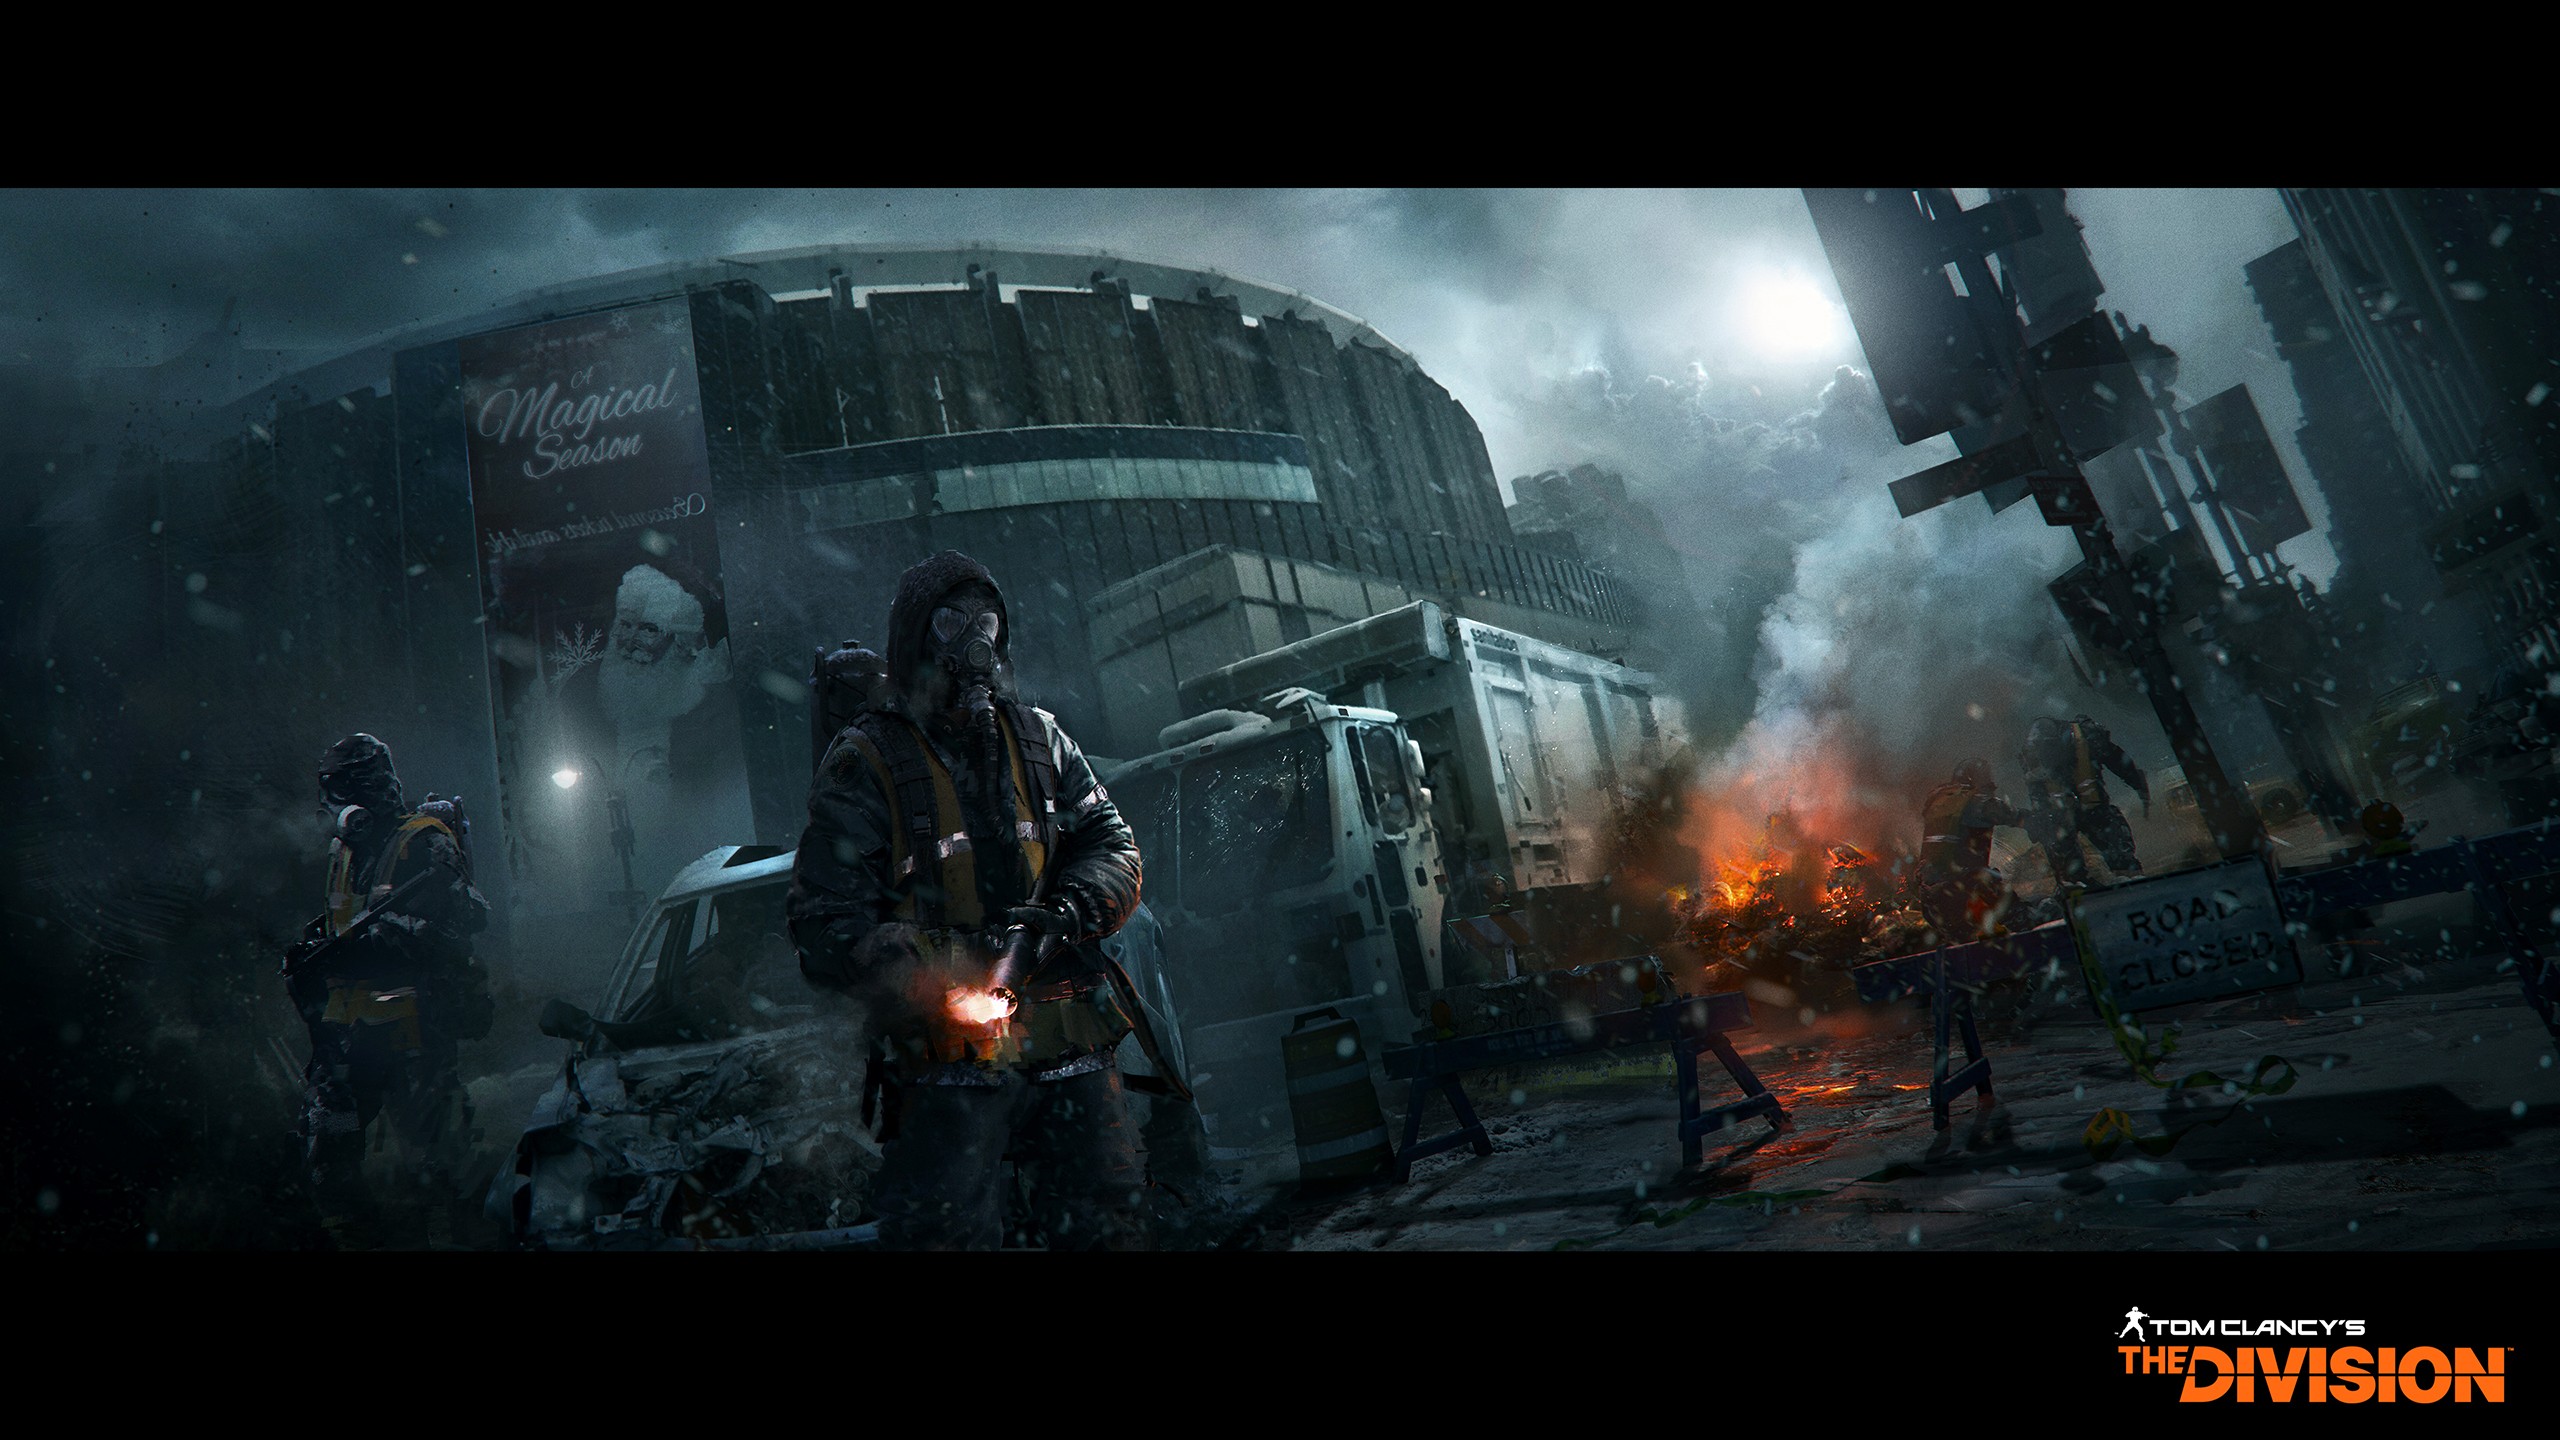 General 2560x1440 video games Tom Clancy's The Division PC gaming apocalyptic video game art